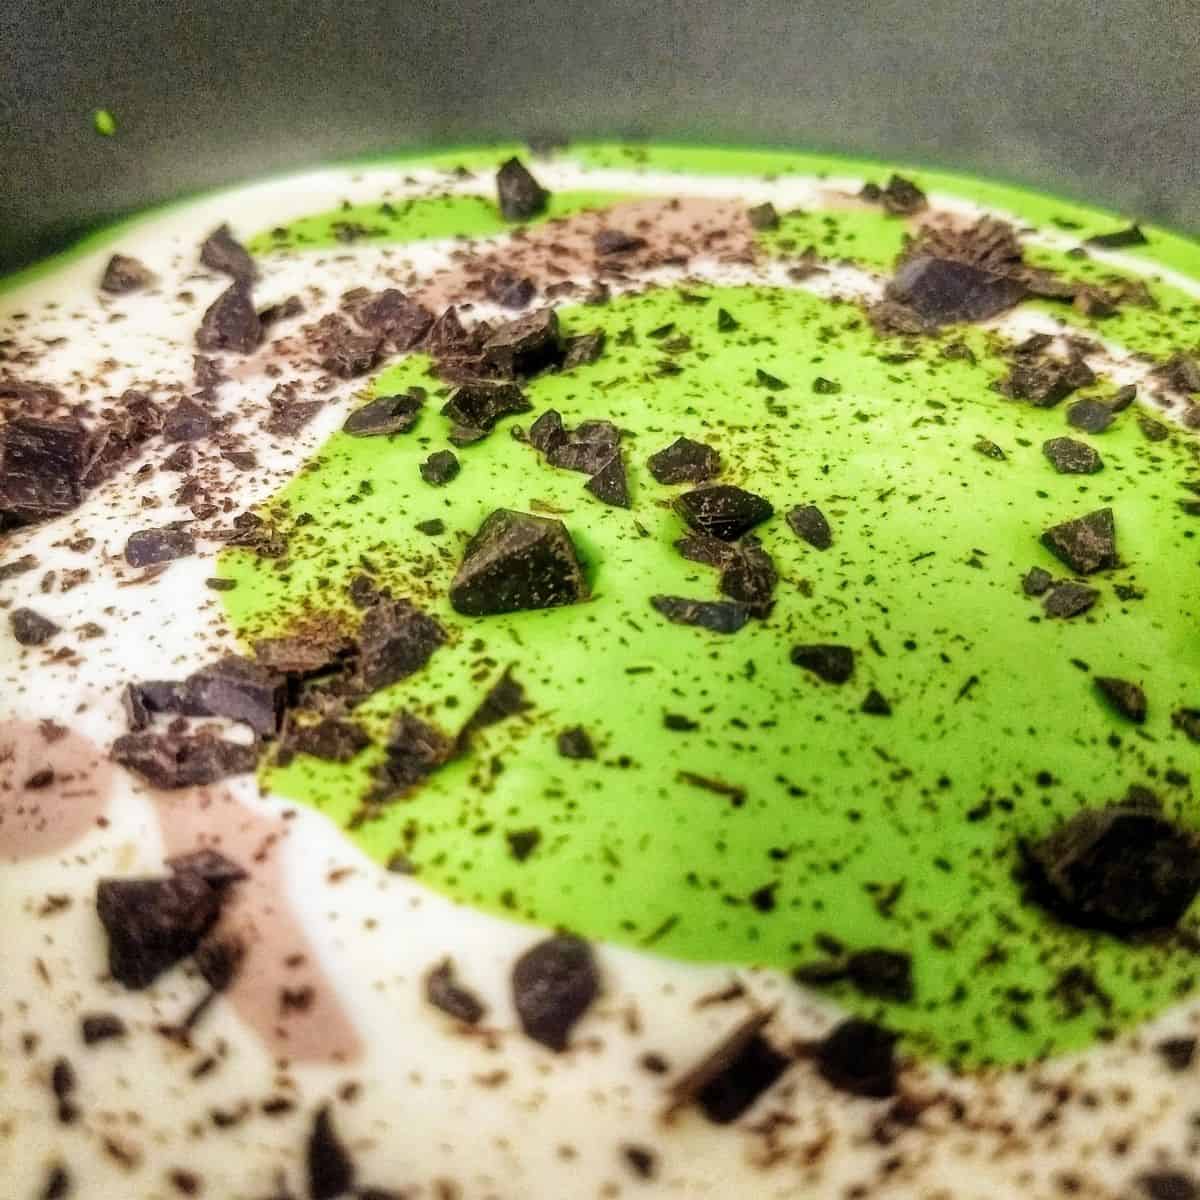 Keto mint chocolate cheesecake batter with chocolate chunks - Keto Mint Chocolate Cheesecake